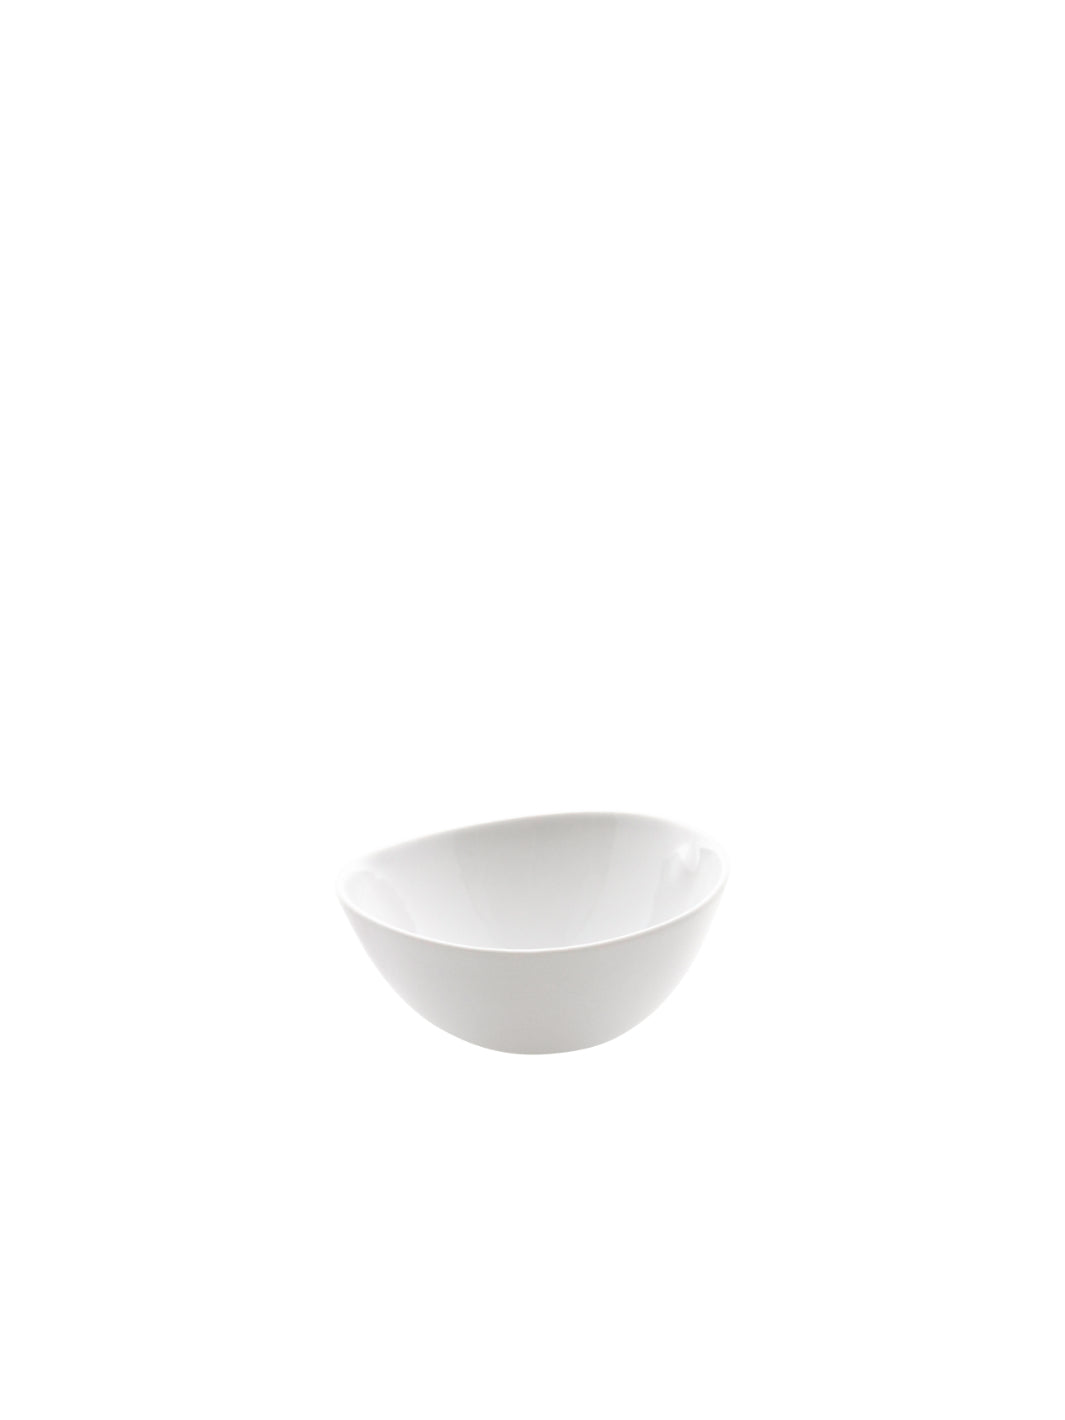 COOKPLAY Shell Ice Cream Bowl (13.5x13cm/5.3x5.1in)